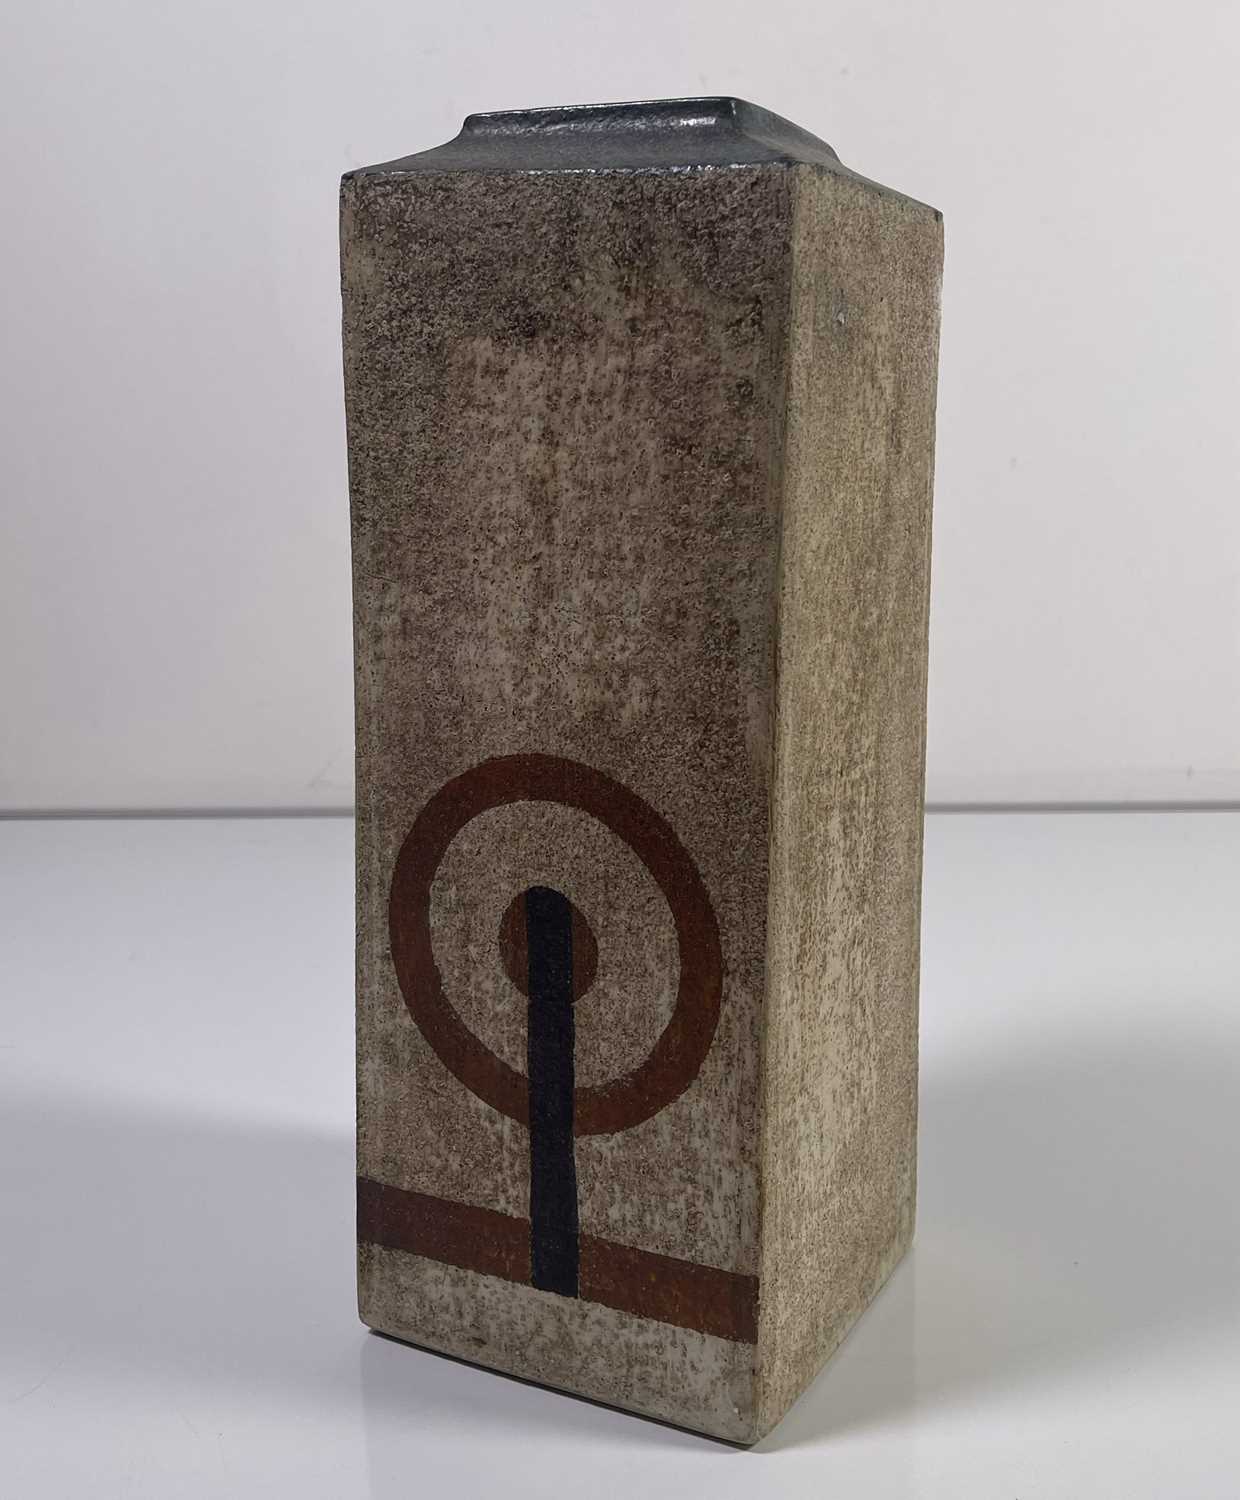 Lot 48 - IN THE MANNER OF TROIKA - LARGE RECTANGLE VASE.